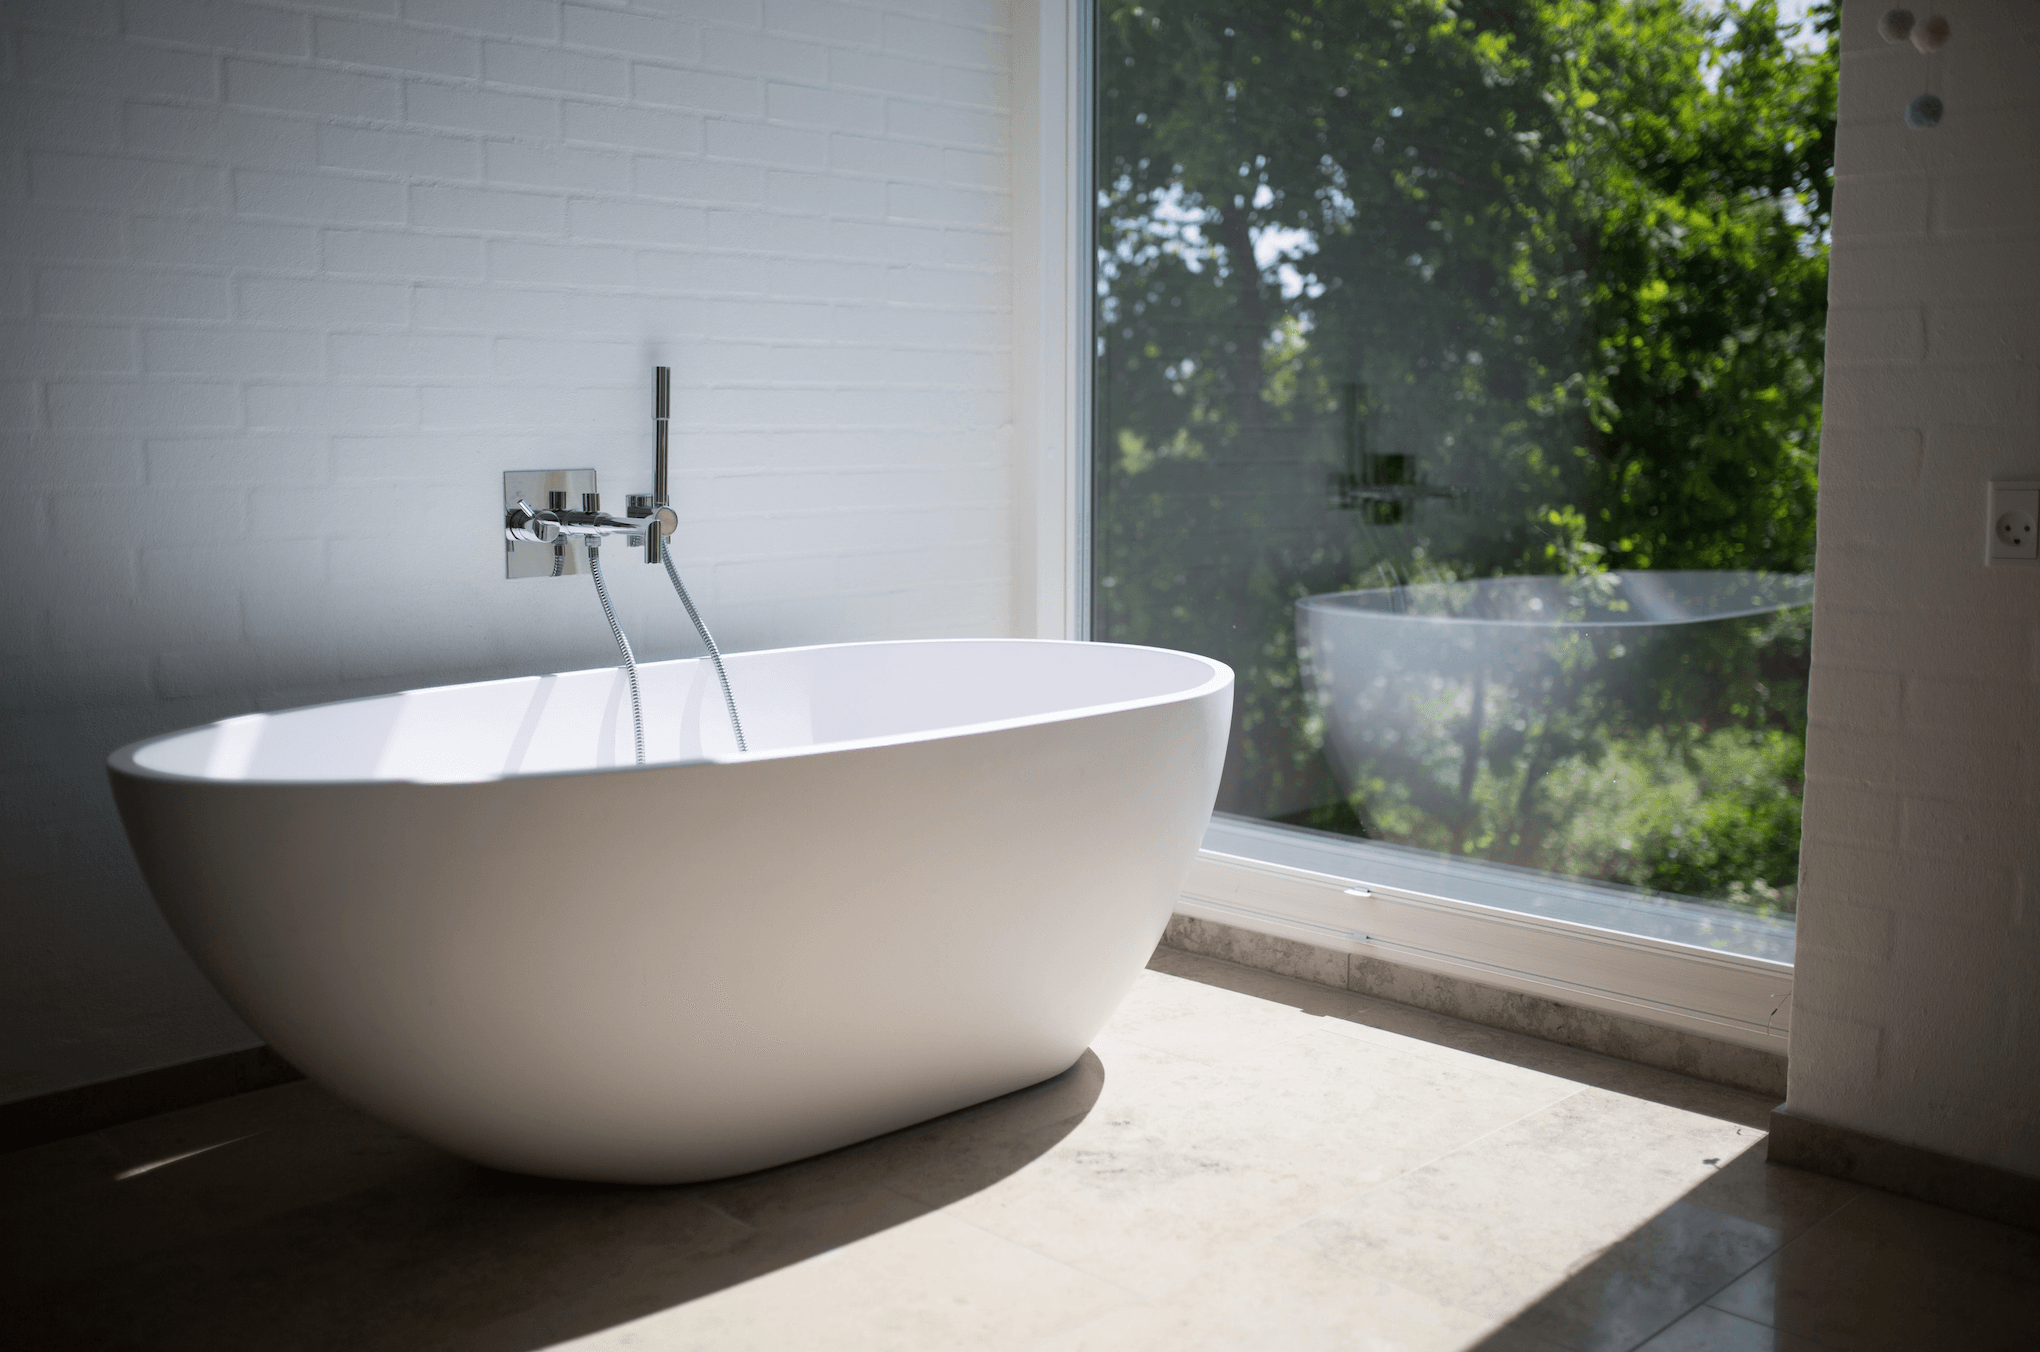 The Pros And Cons Of Different Bathtub Materials - Bathroom Design Center